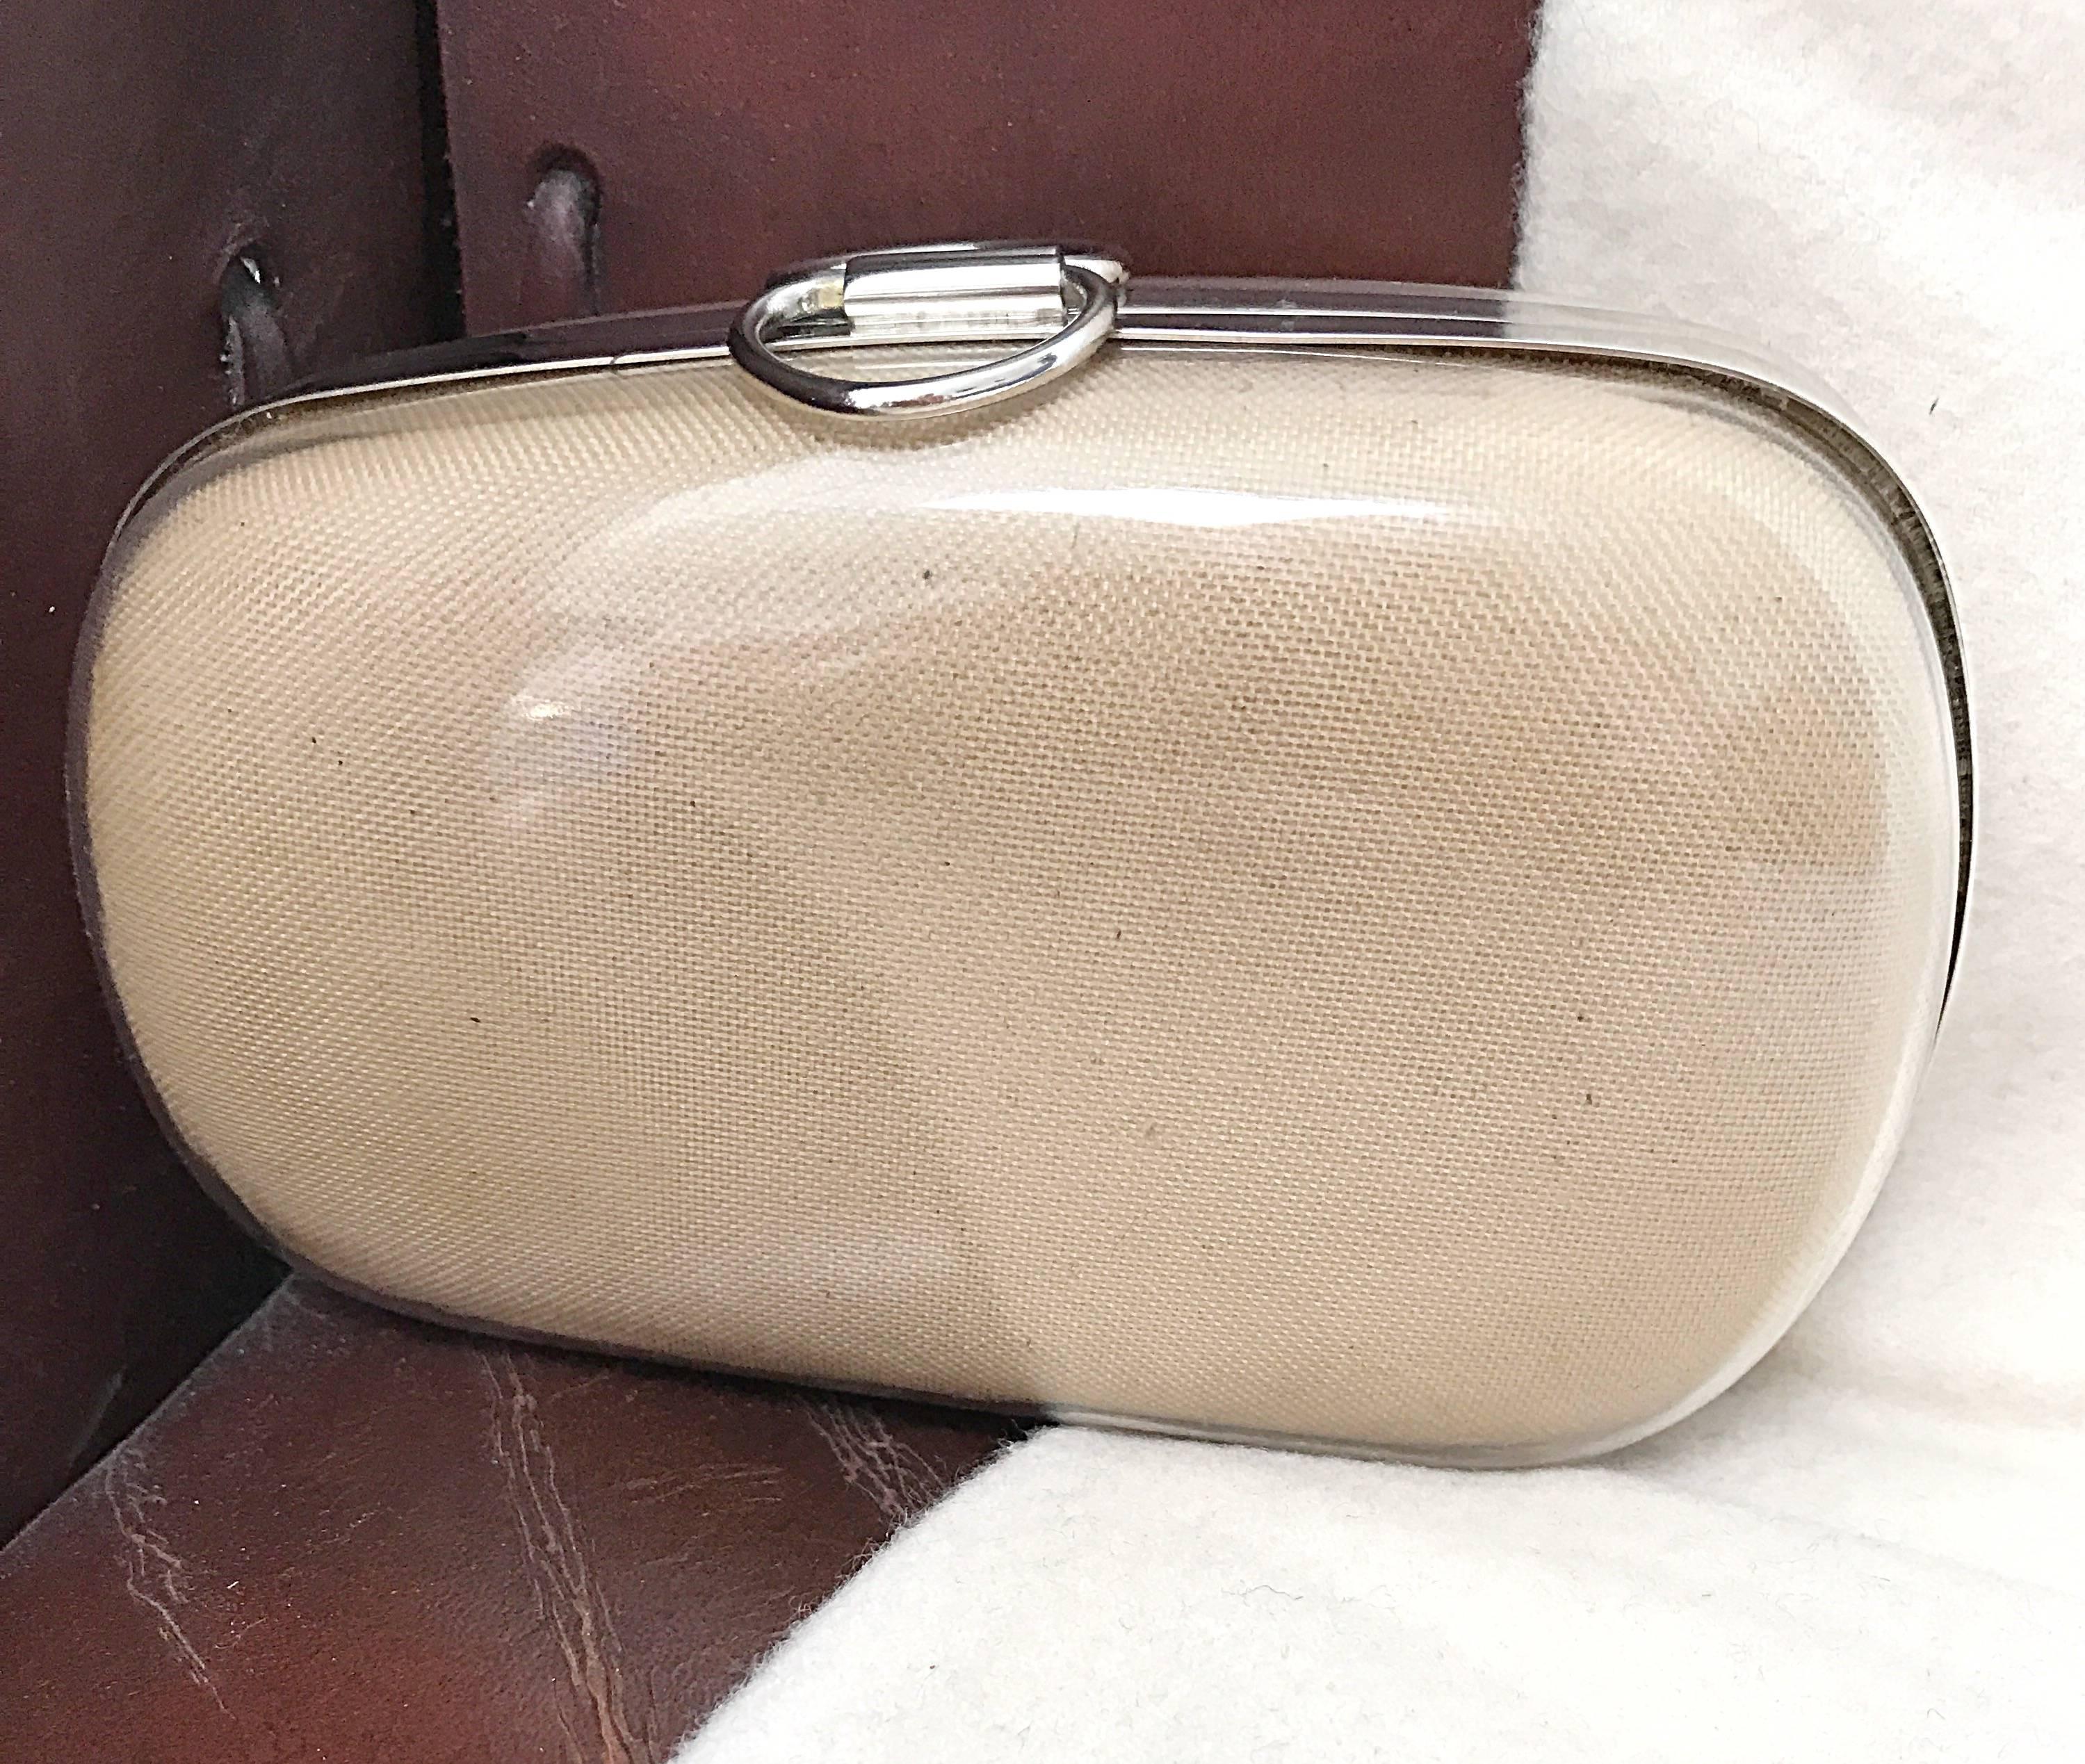 Rare 1990s Isaac Mizrahi Nude Tan Plexiglass Minaudière Finger Clutch Bad Purse In Excellent Condition For Sale In San Diego, CA